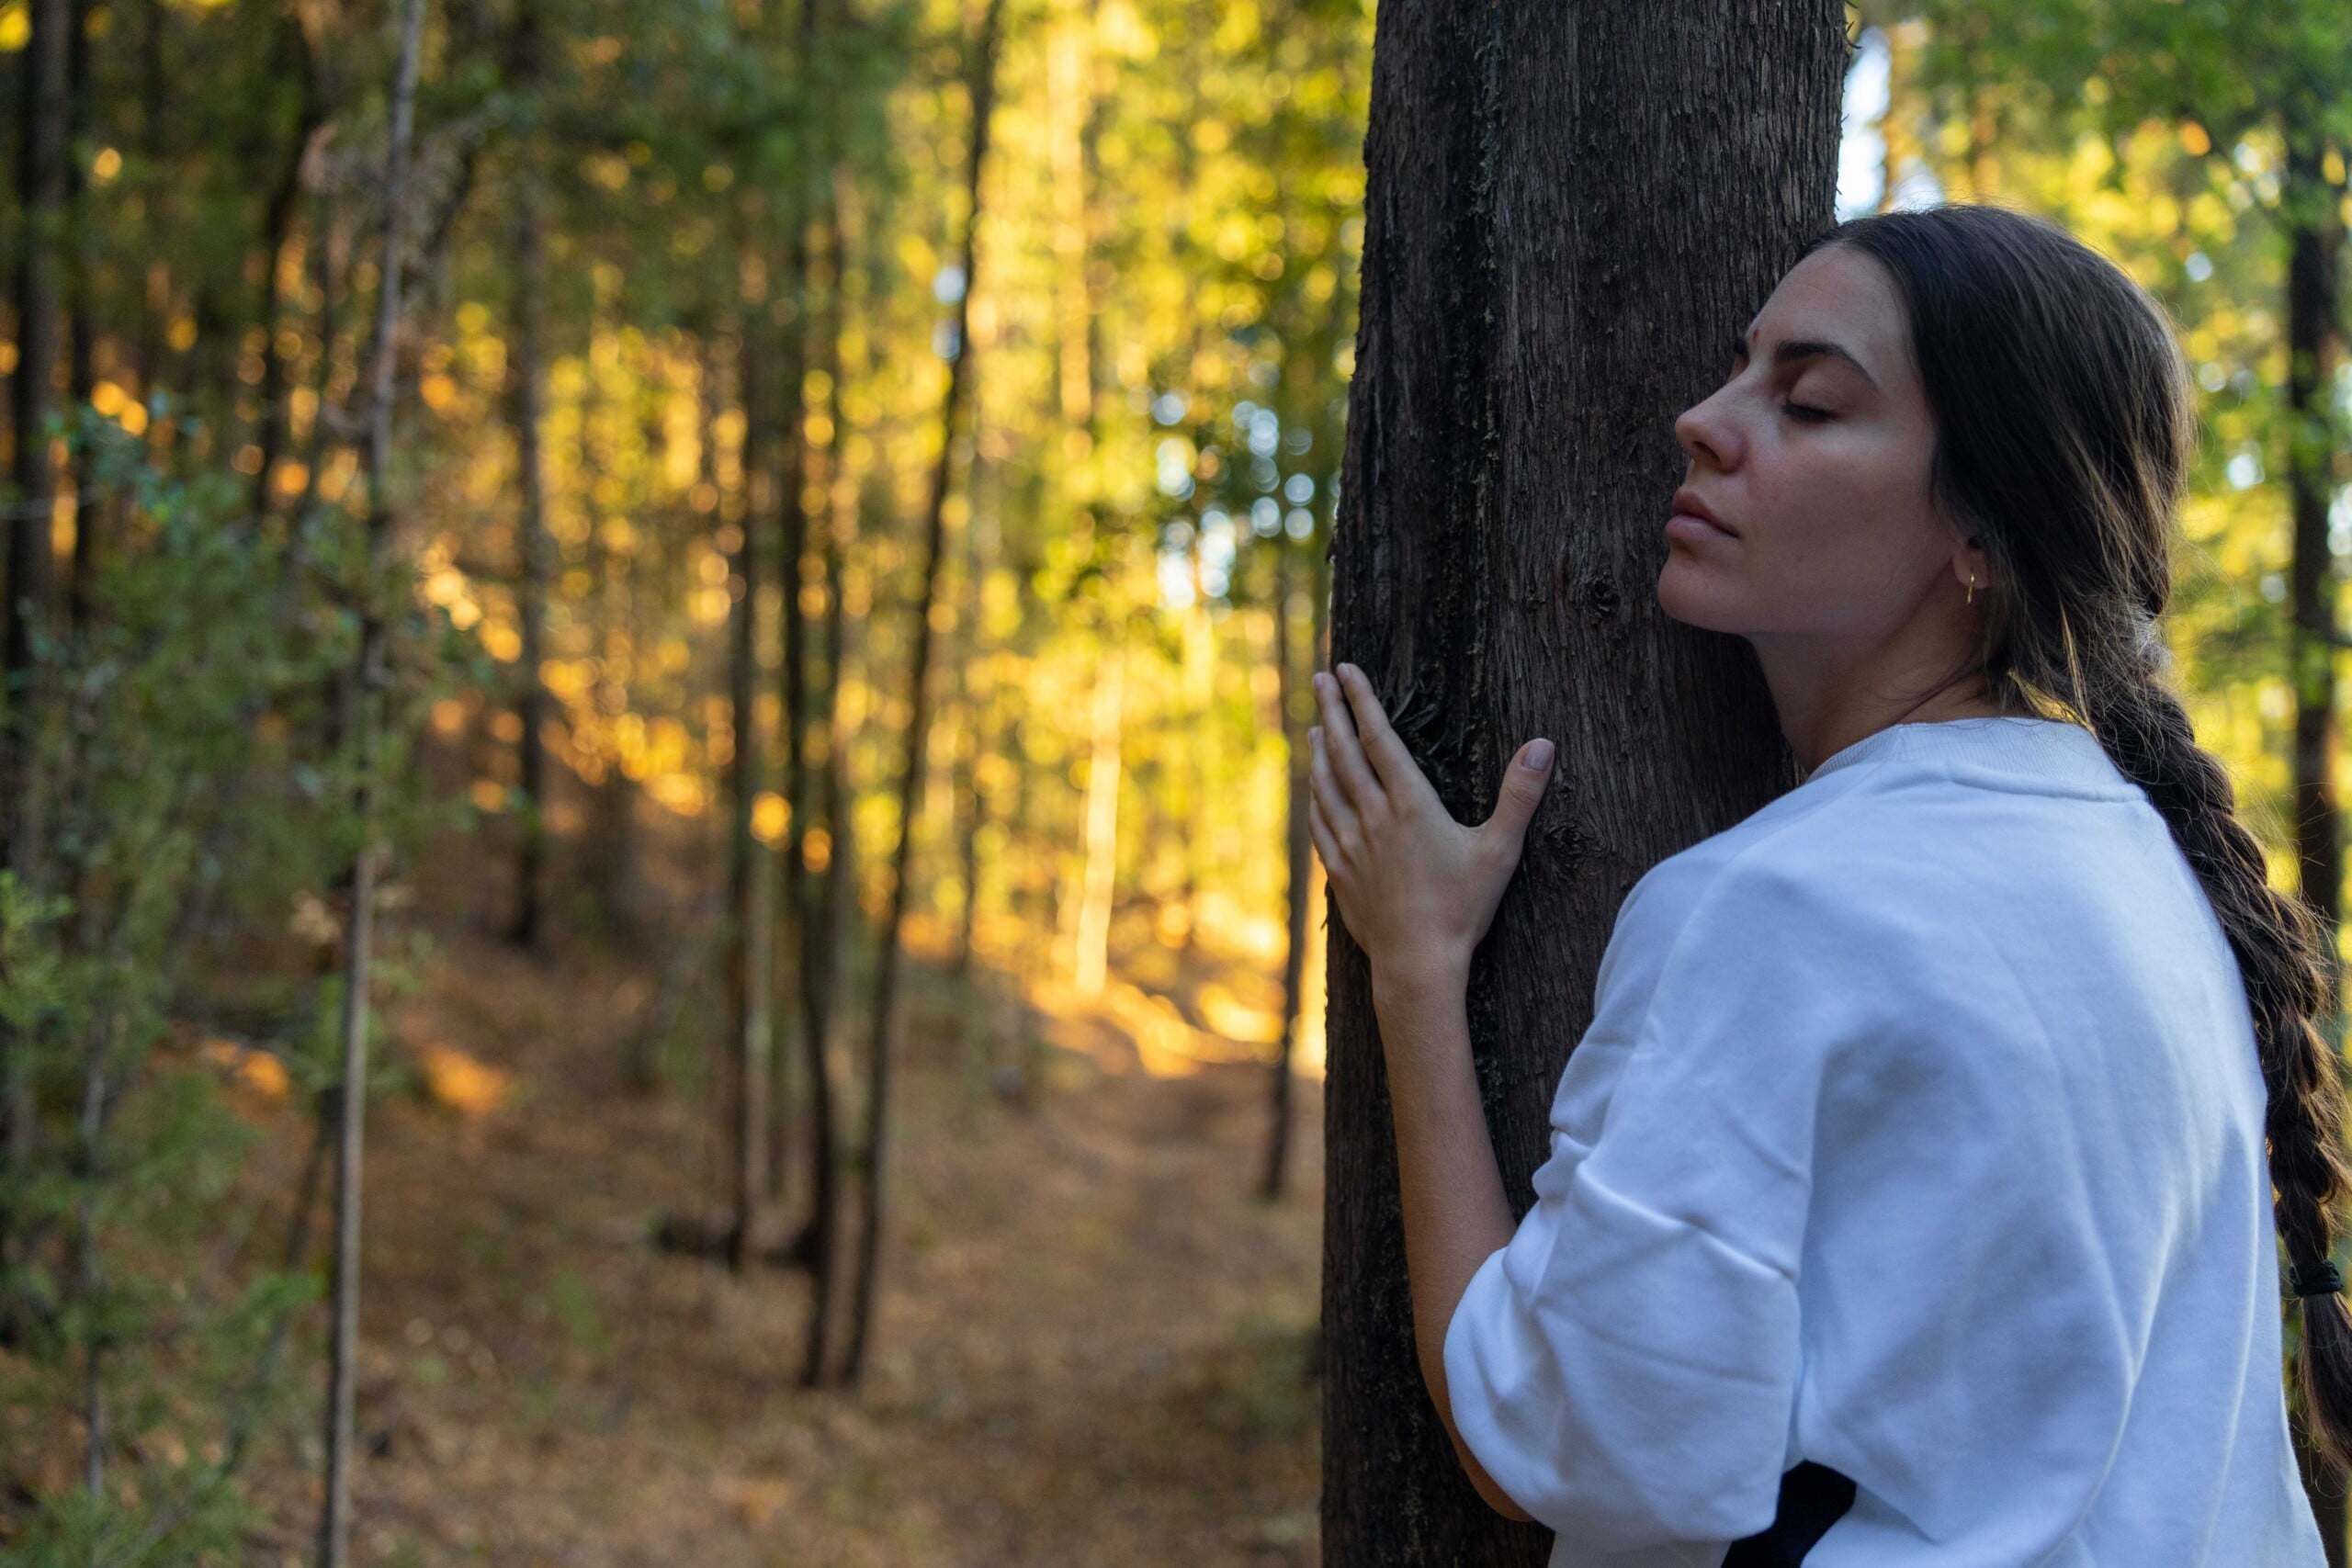 Tree-hugging nurtures a connection to nature, like the Stress Relief Programme at Euphoria Retreat.